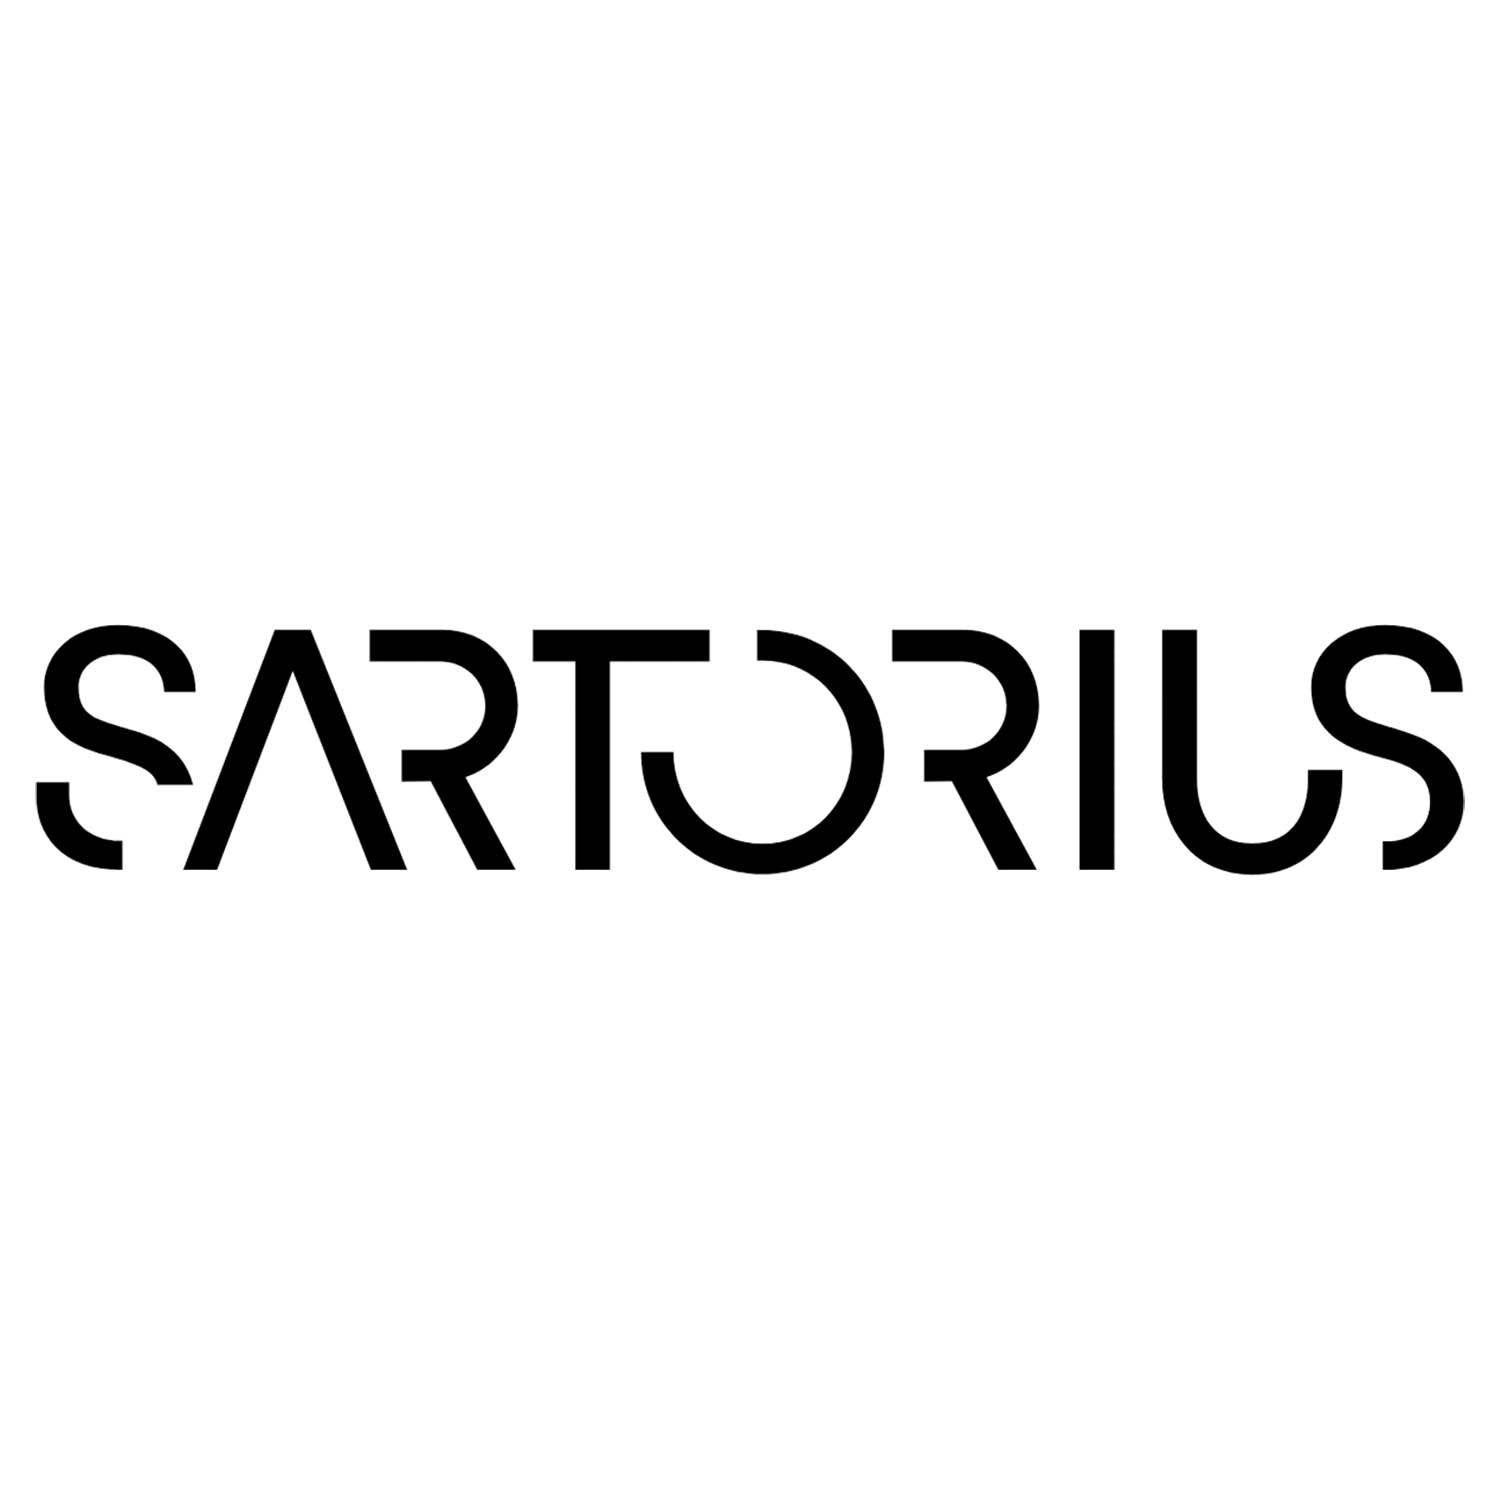 Sartorius FT-4-308-185, Technical Papers, Smooth/ Grade 3 w